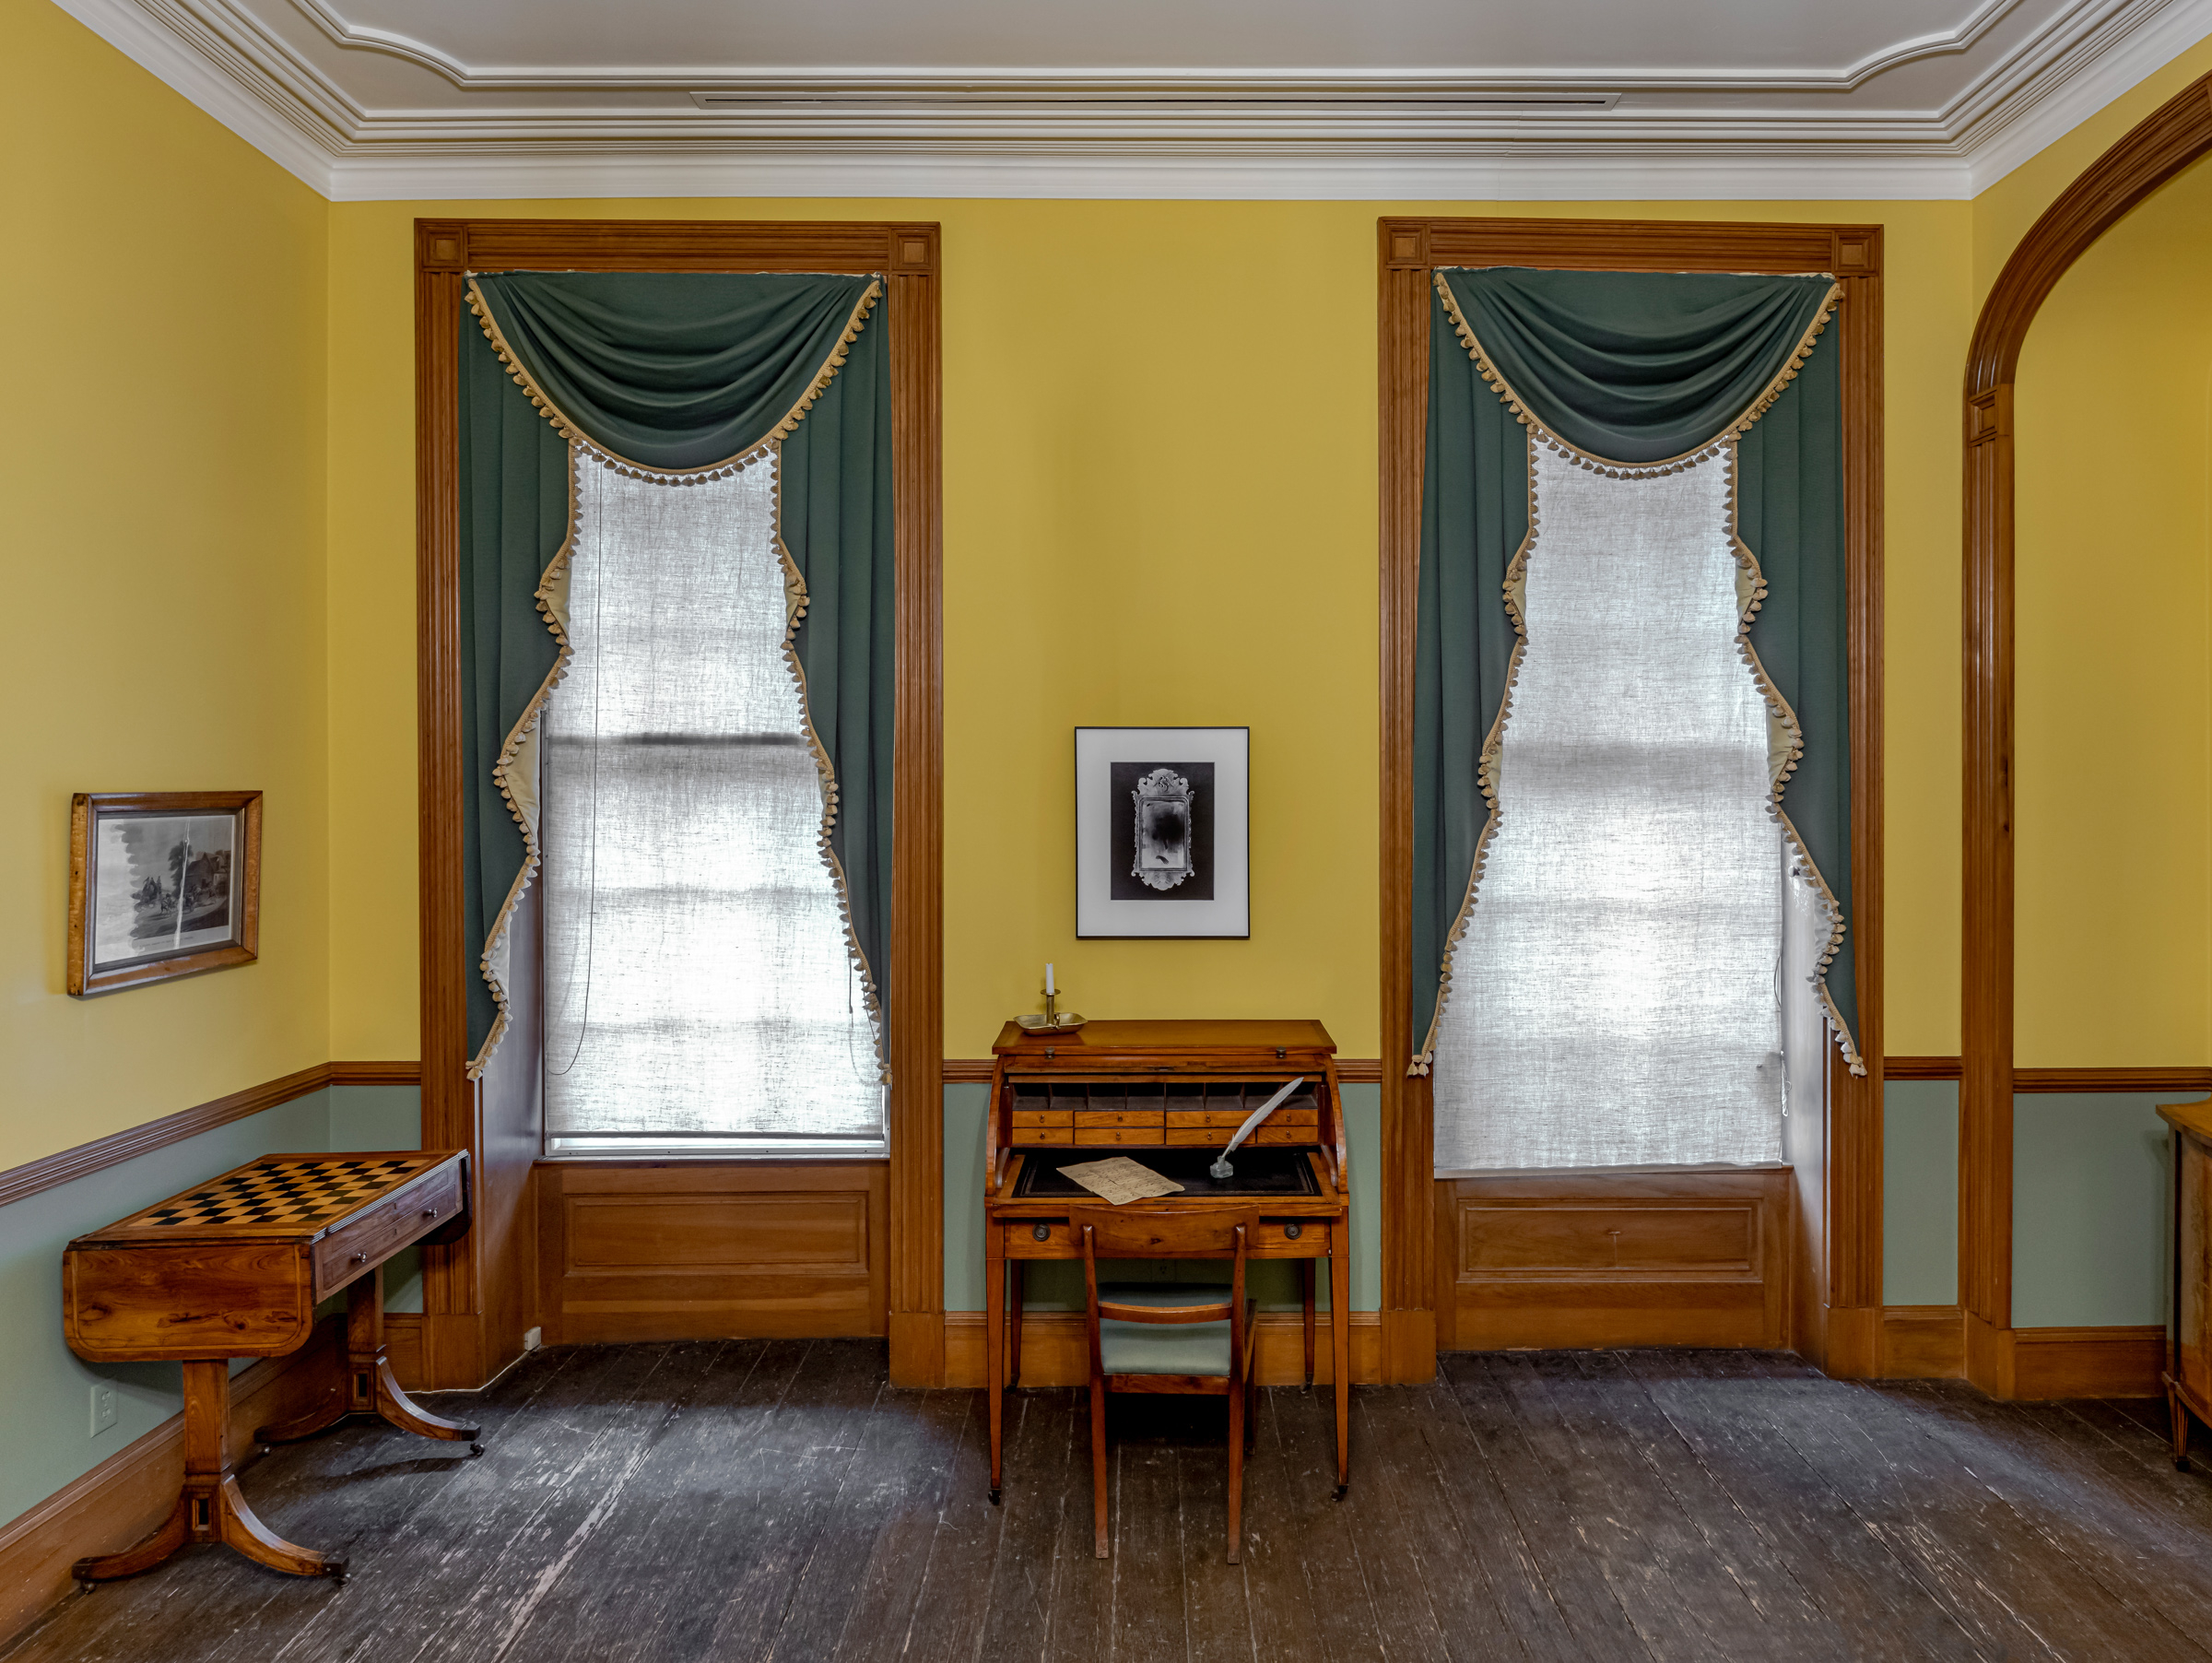     Tereza Zelenkova, The Double Room, installation view, Campbell House Museum, Toronto, 2021. Courtesy of the artist and CONTACT. Photo: Toni Hafkenscheid

